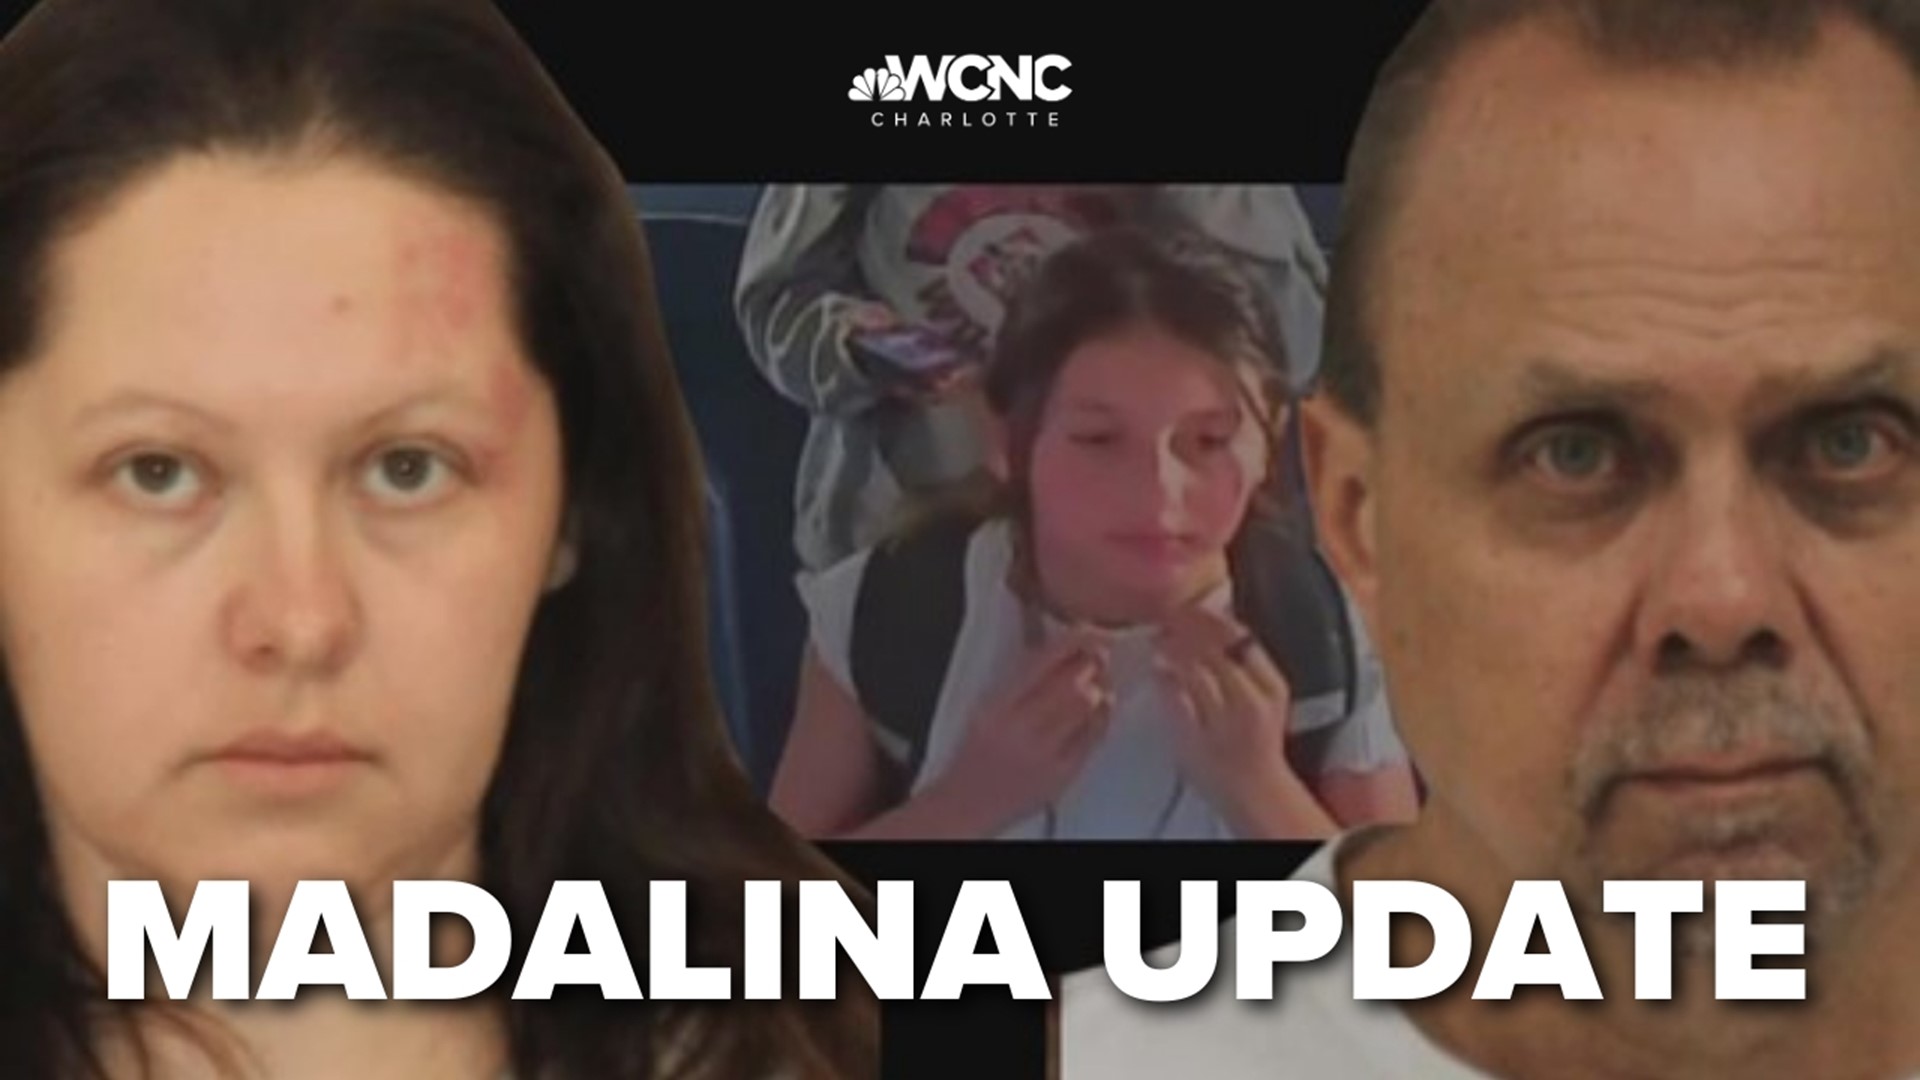 It's now been almost 90 days since Madalina Cojocari was last seen publicly, but her parents did not report that she was missing for three weeks.